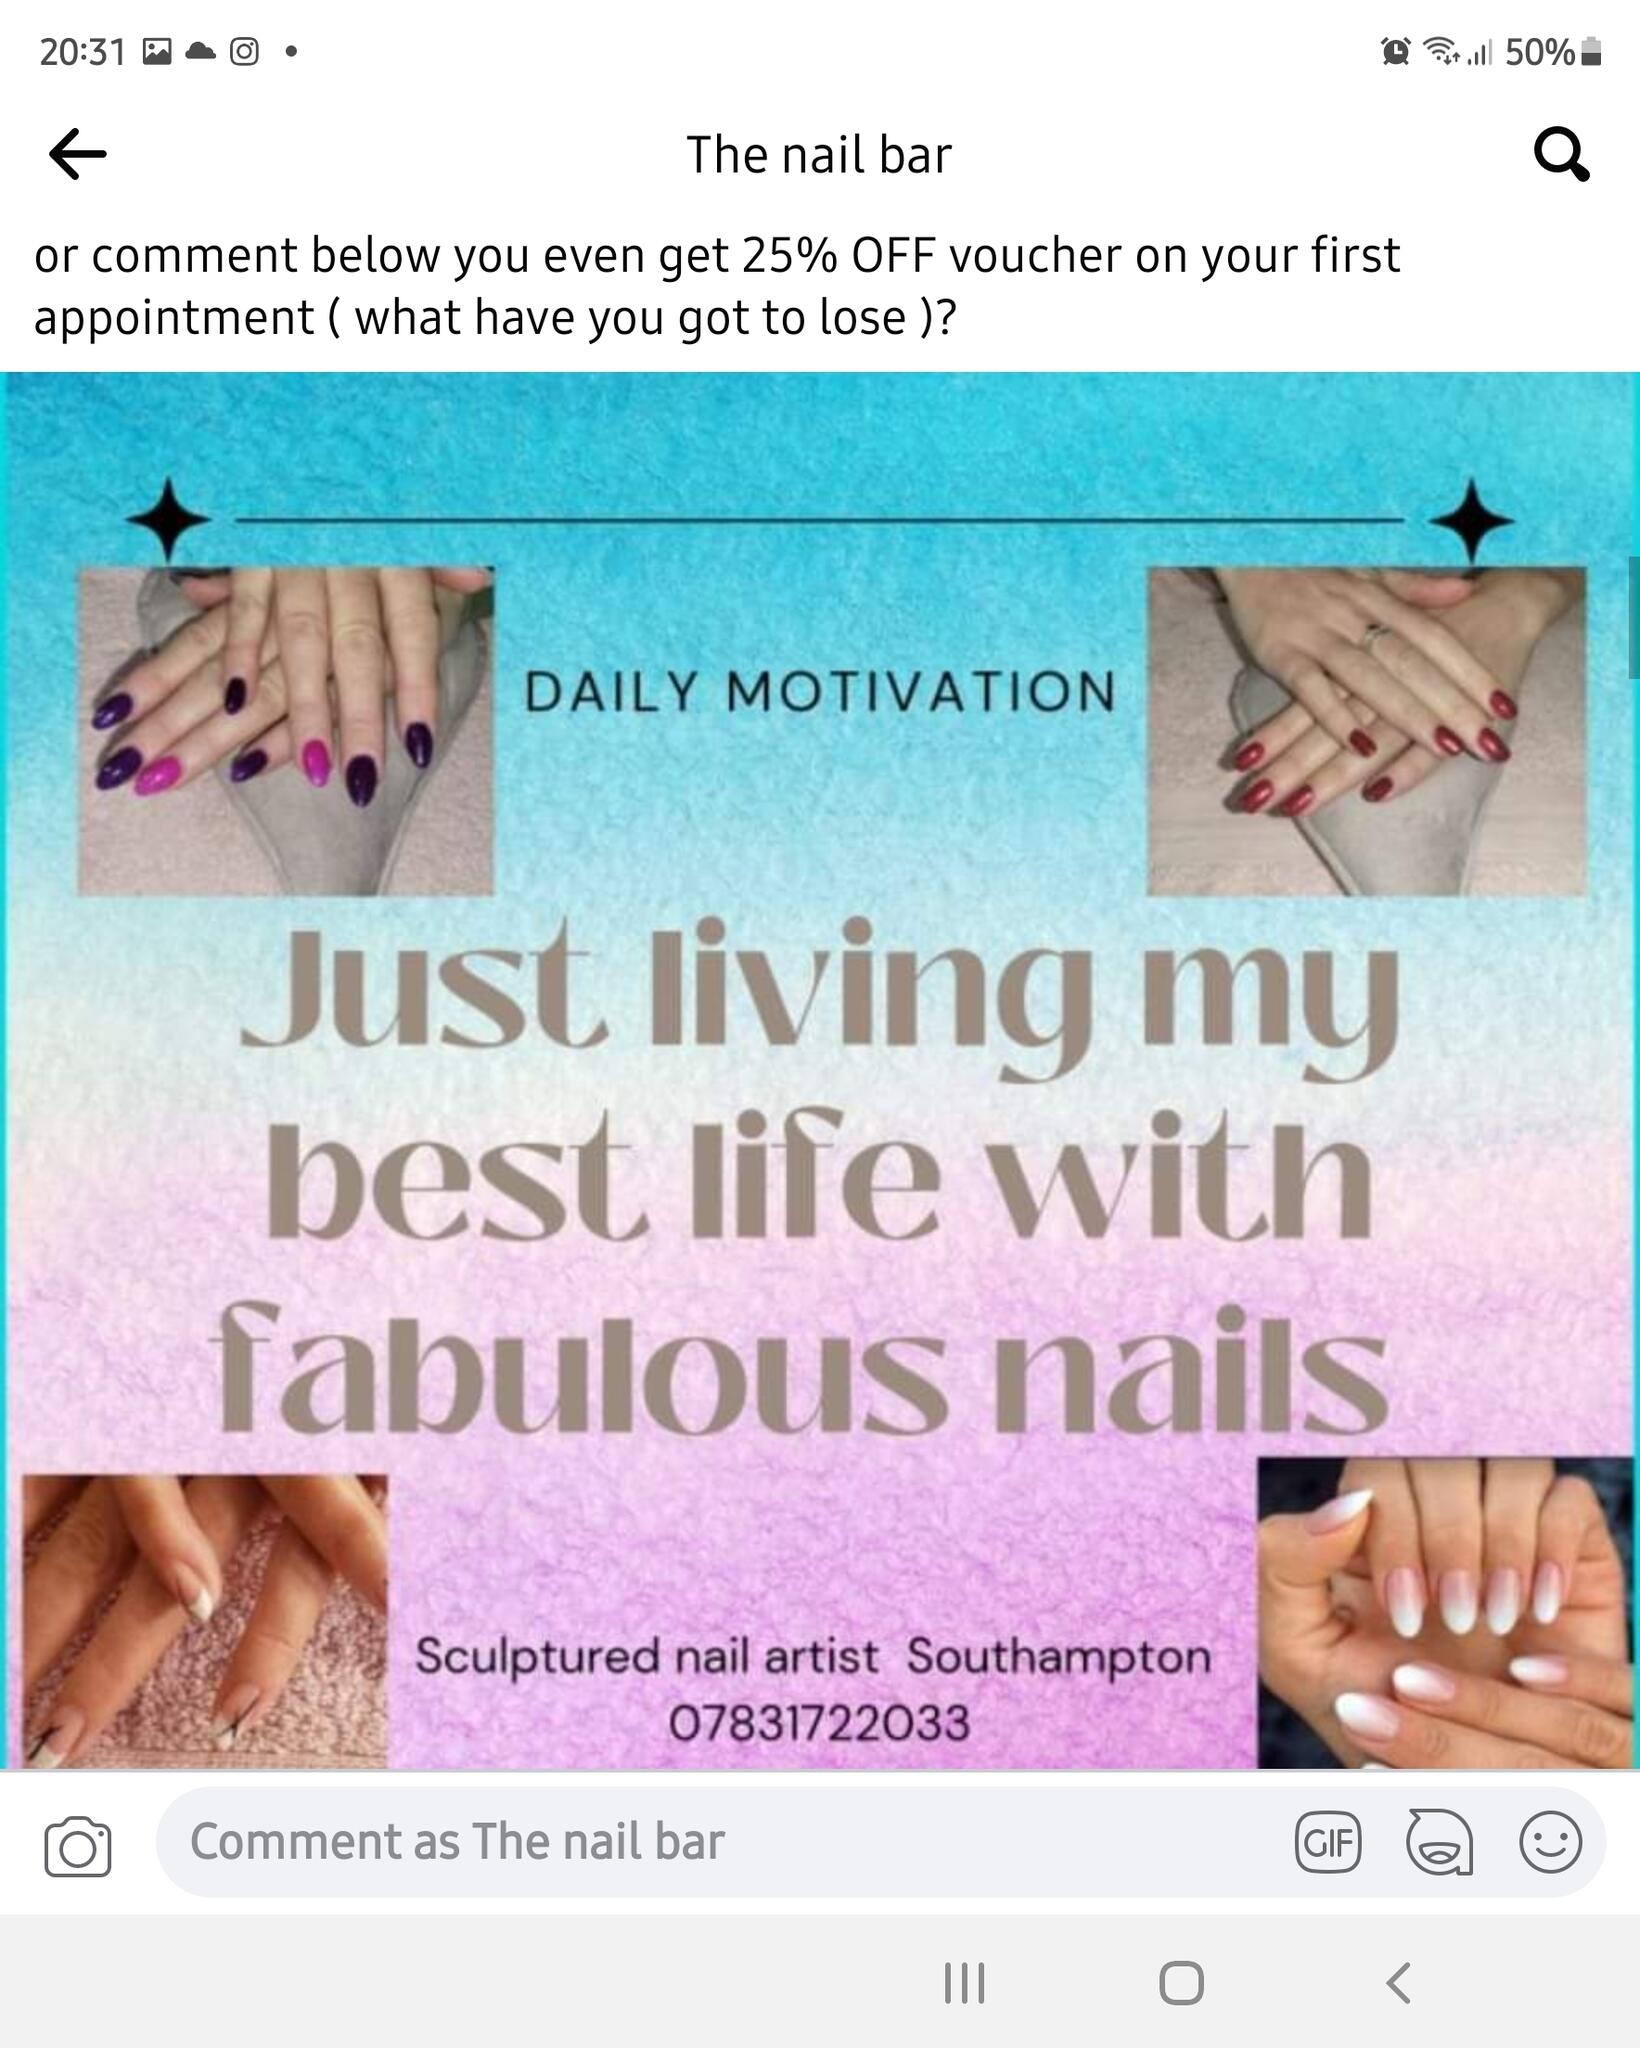 What are BIAB nails and how long does the healthy mani last? | Woman & Home